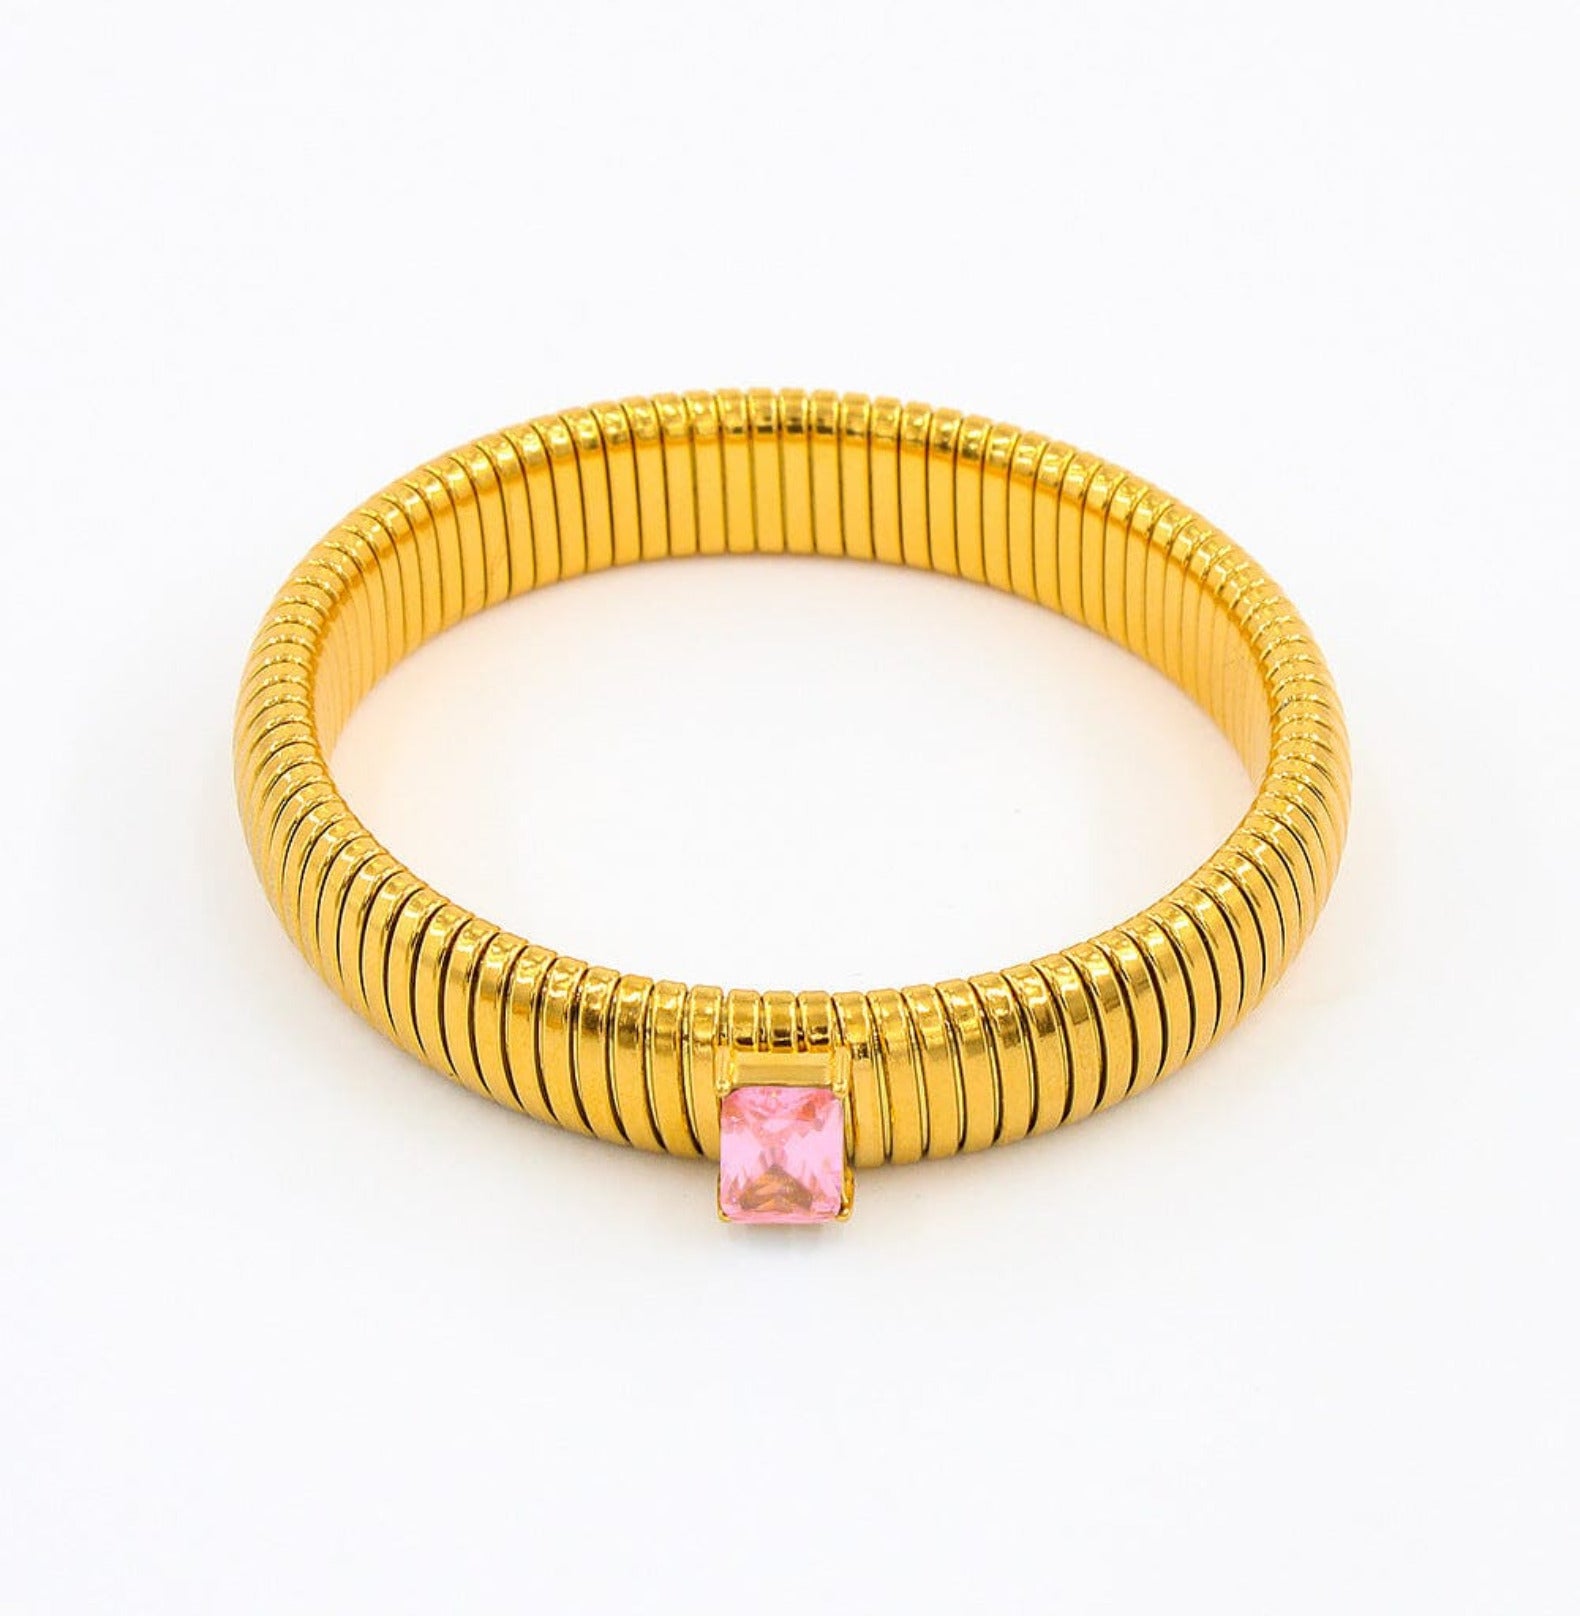 CHUNKY STONE BANGLE BRACELET - GOLD braclet Yubama Jewelry Online Store - The Elegant Designs of Gold and Silver ! Pink Diamond 12mm 18cm 